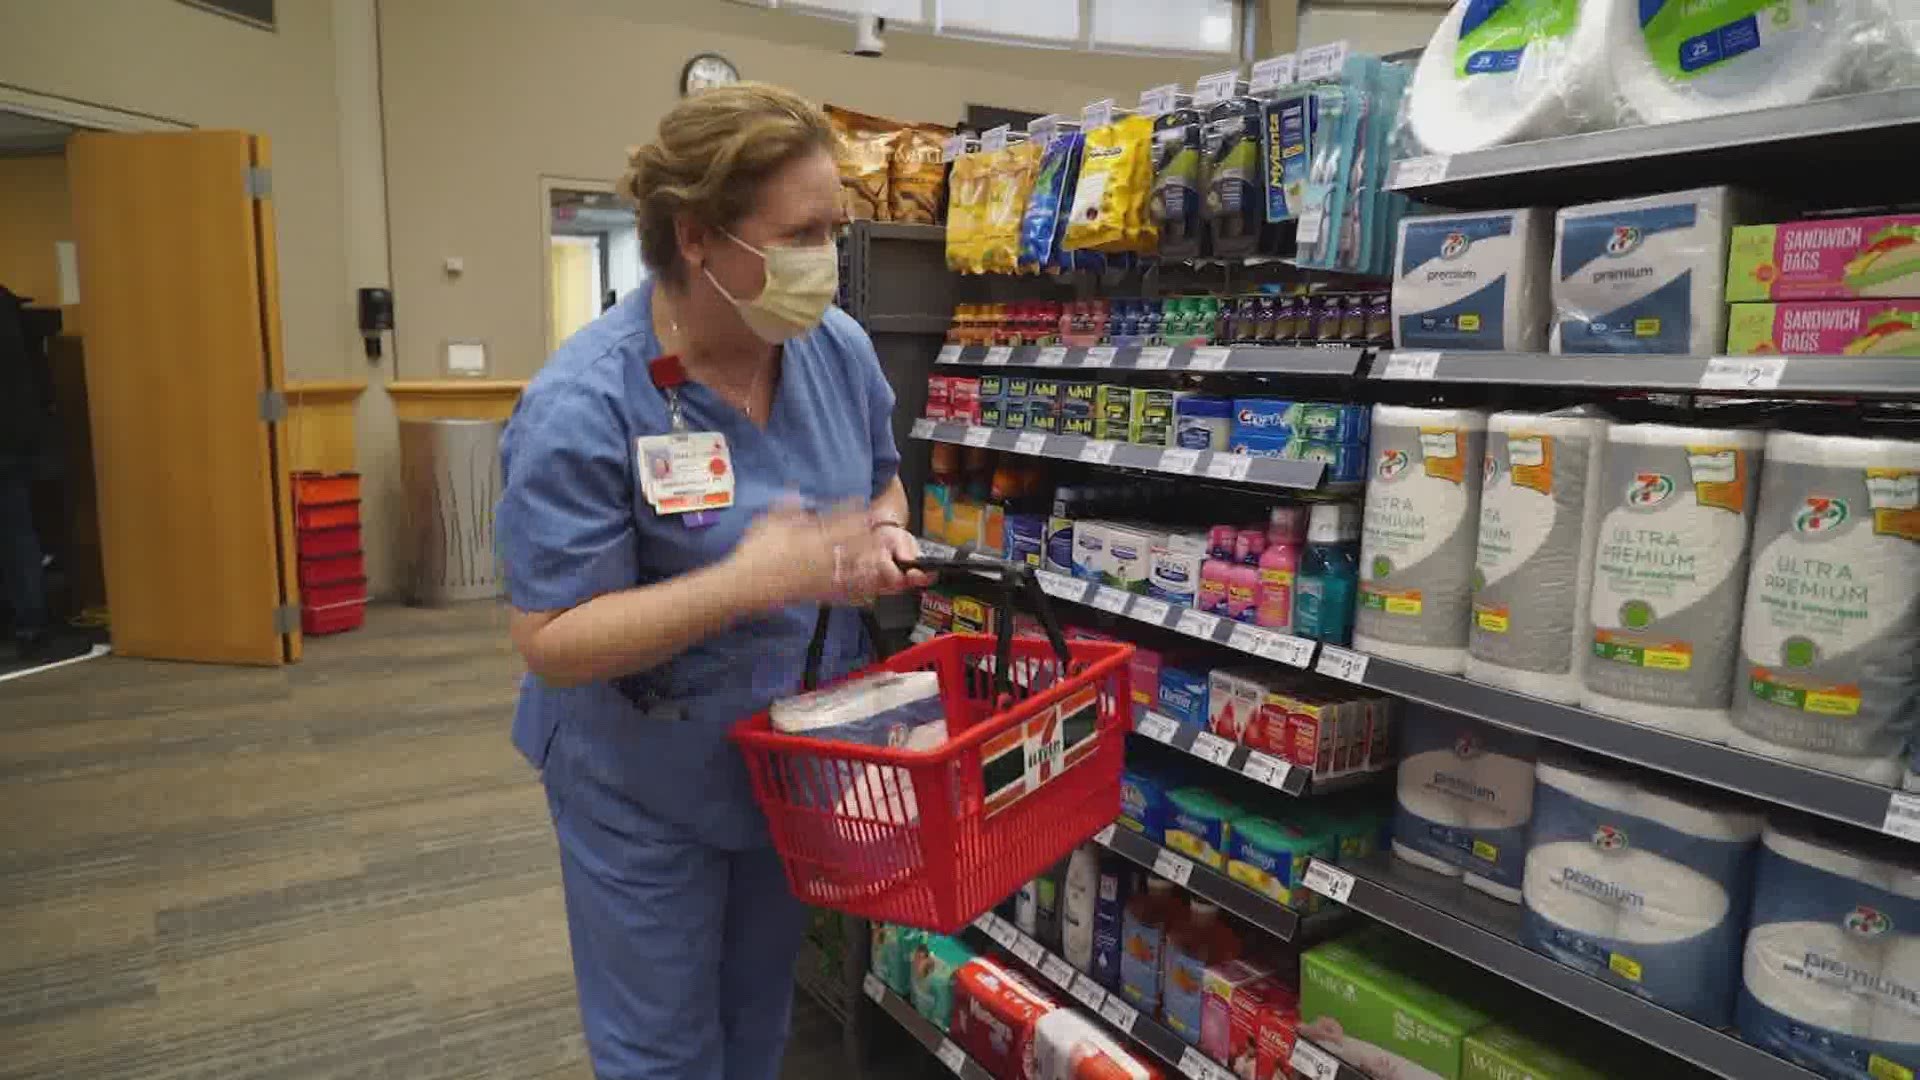 Seven Medical City Healthcare hospitals in North Texas have opened “mini grocery stores," for staff during the COVID-19 pandemic.